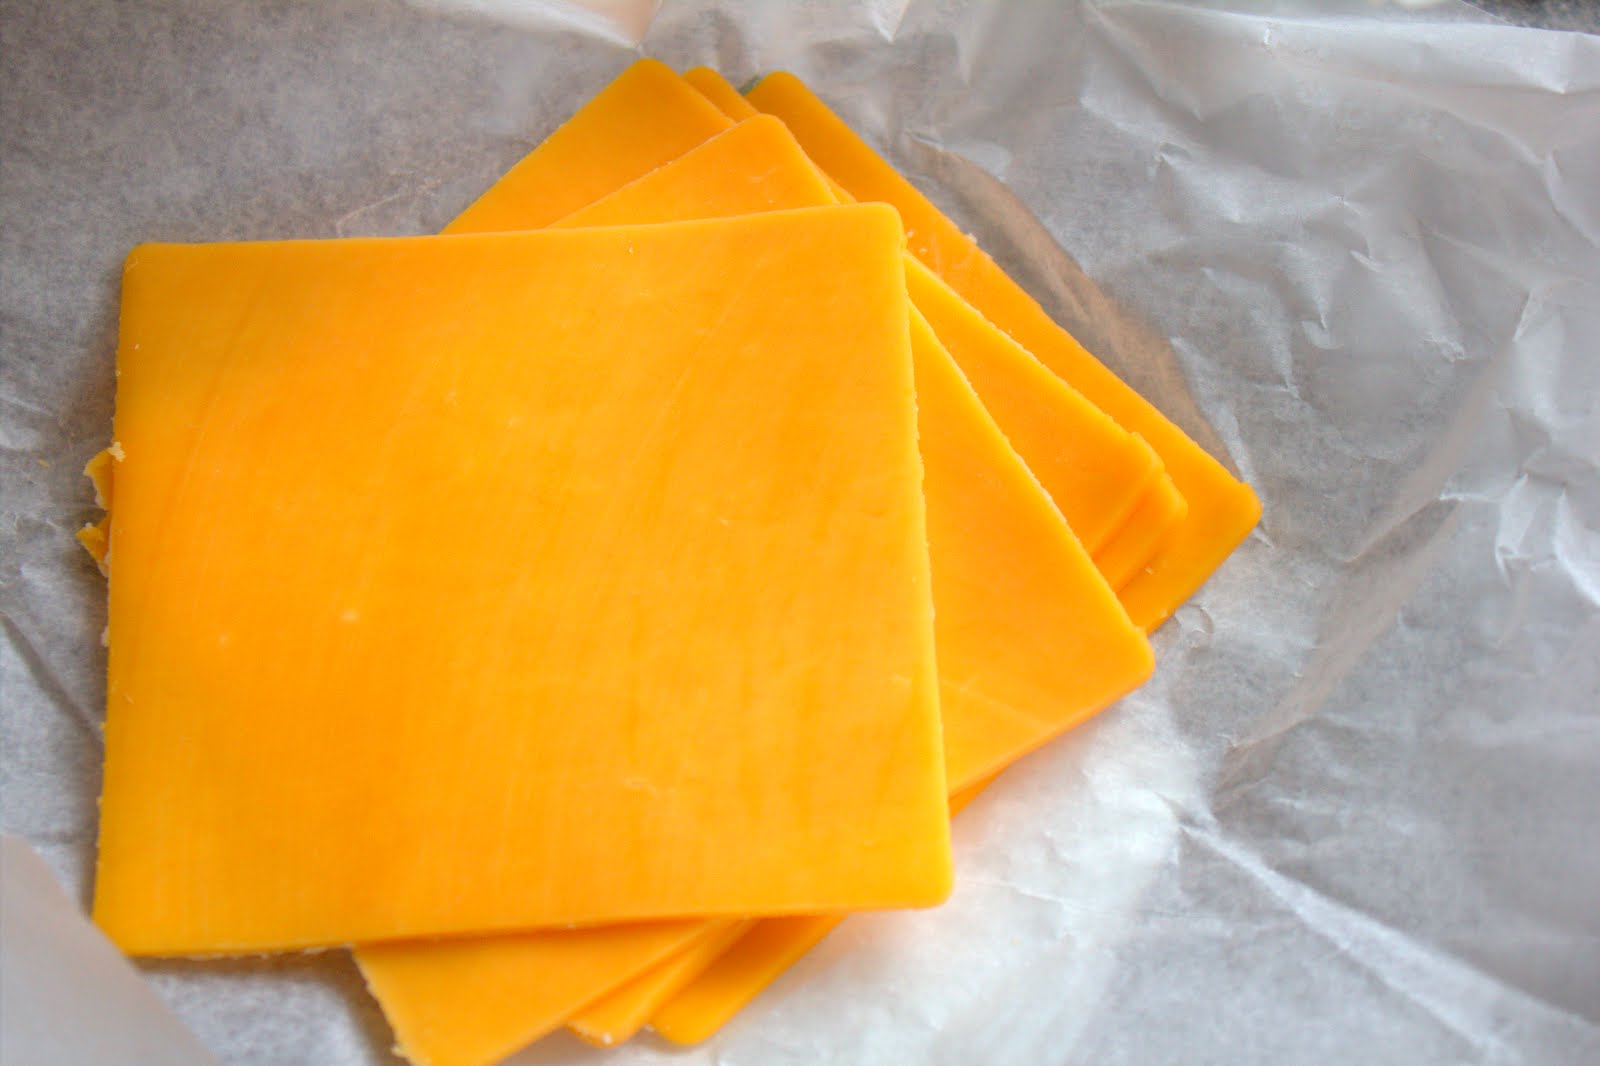 The fast food cheese is not 100% cheese, in fact it's less than half that. Around 49% of this "cheese" consists of additives, chemicals and flavoring.